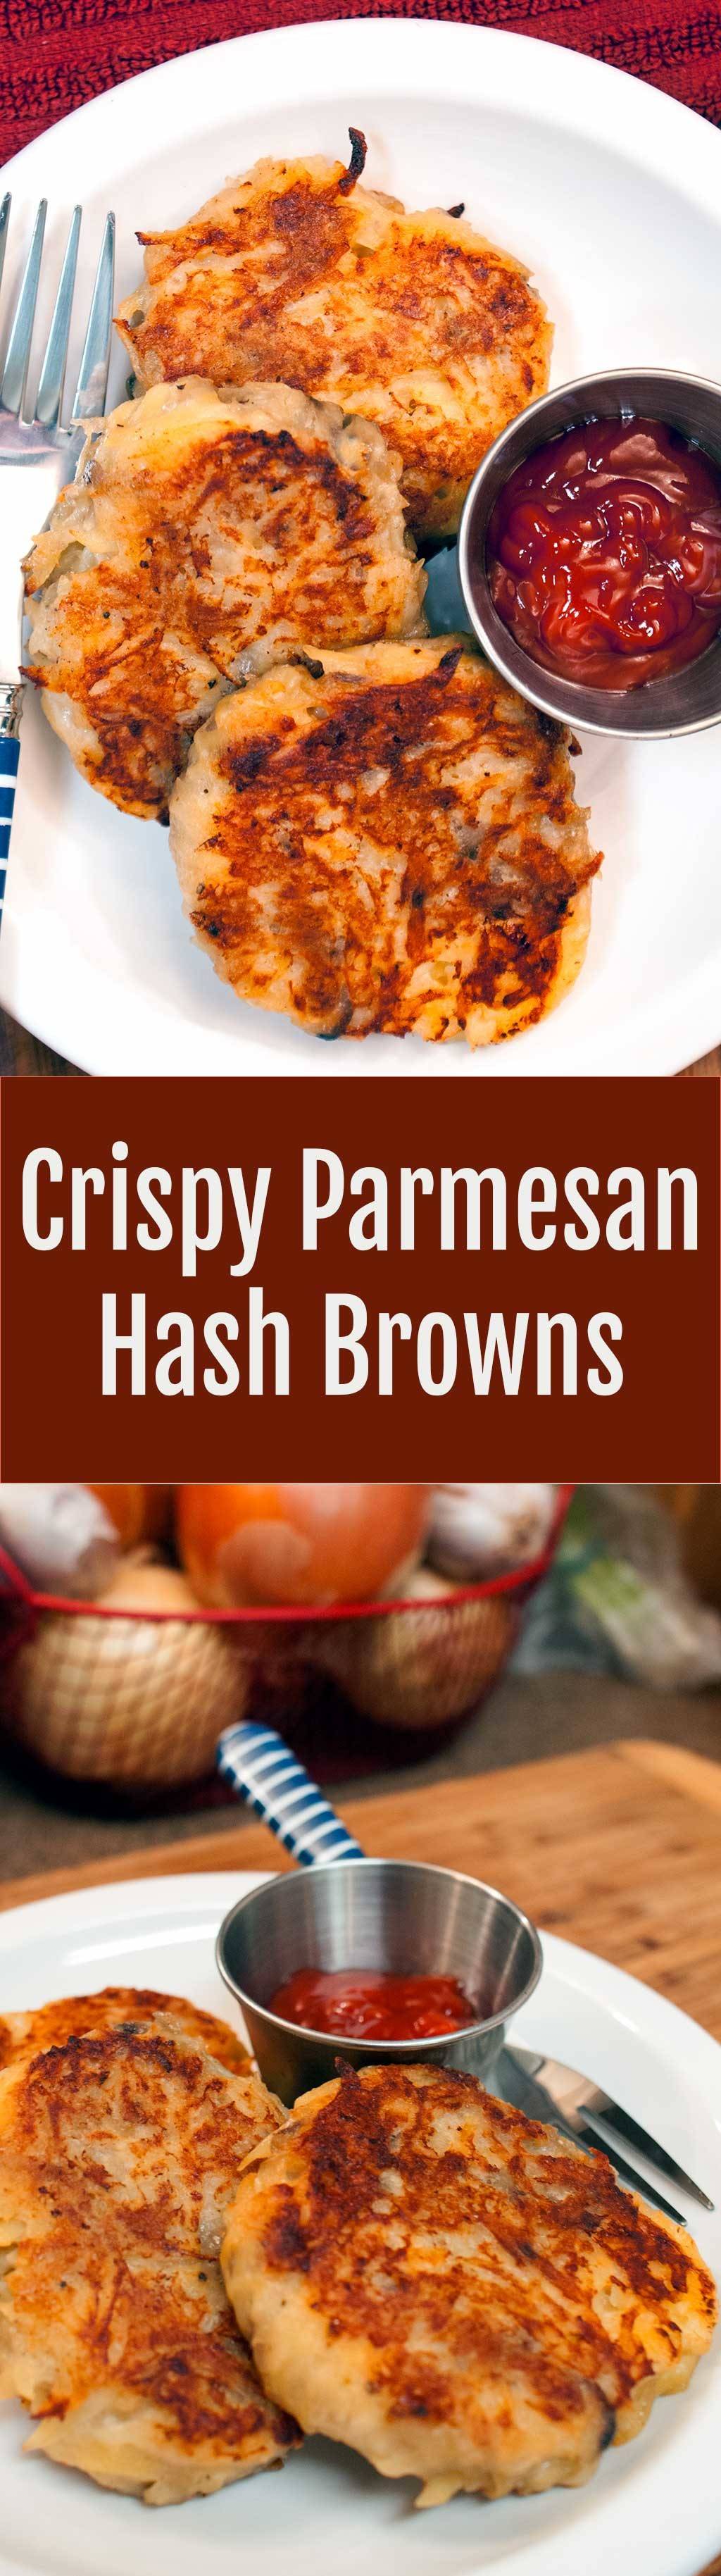 Crispy Restaurant Style Parmesan hash Browns. - Crispy on the outside and fluffy on the inside. (Sort of like latkes, but different.)